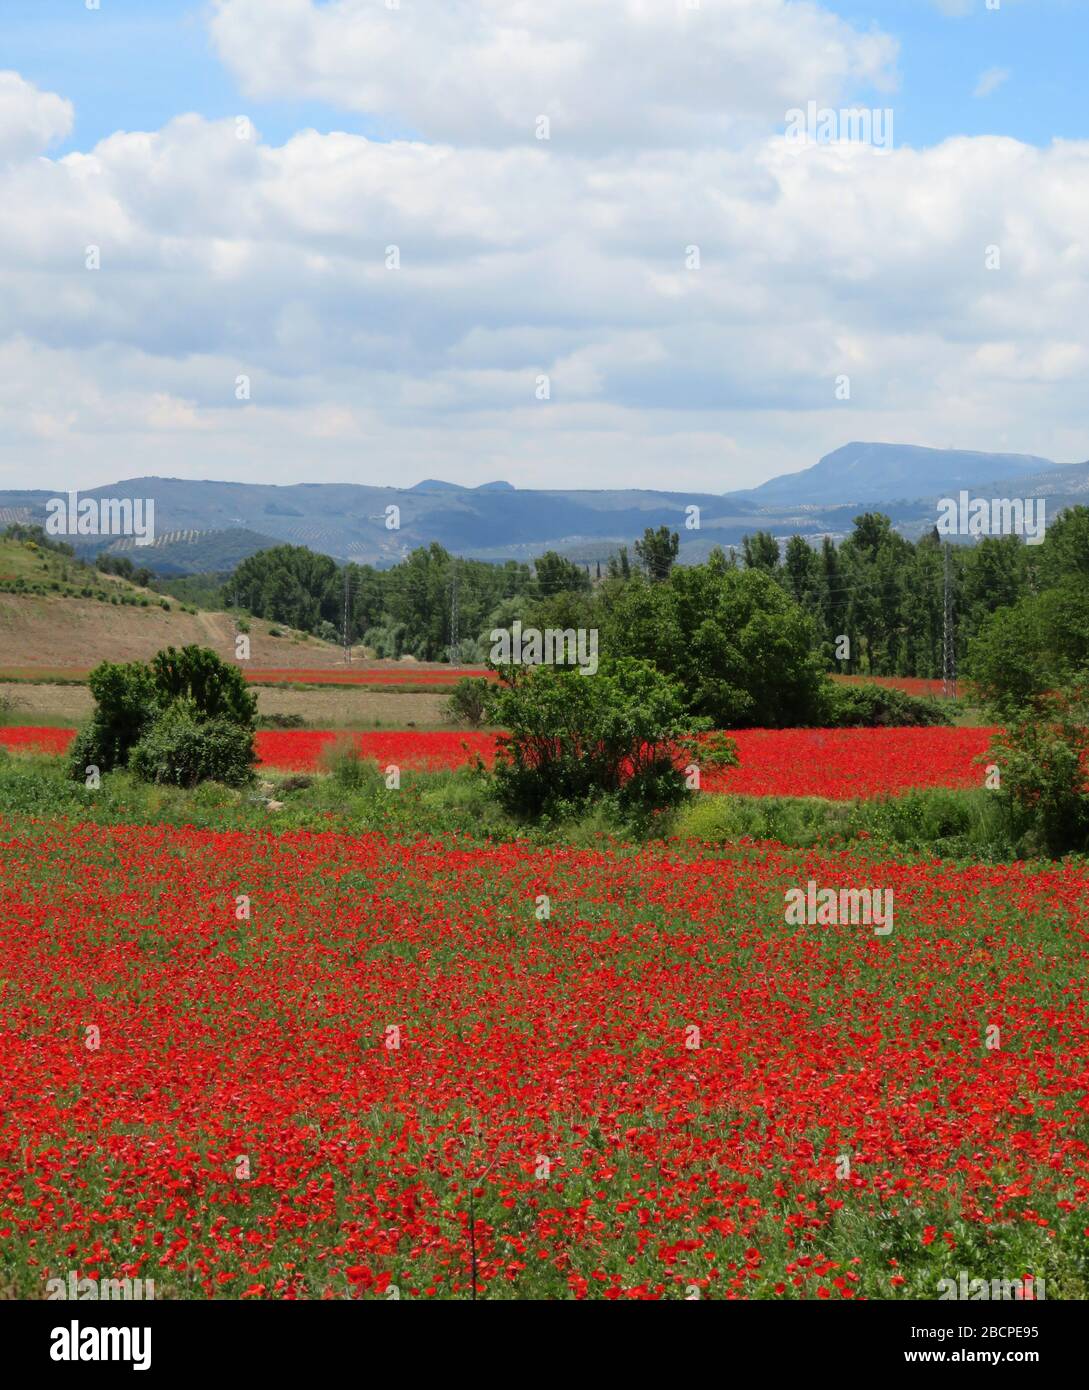 Poppies. Spanish poppy fields in Springtime , Andalusia Spain. Near Santa Ana, Alcala la Real. Vibrant patches of colour. No people. Stock Photo